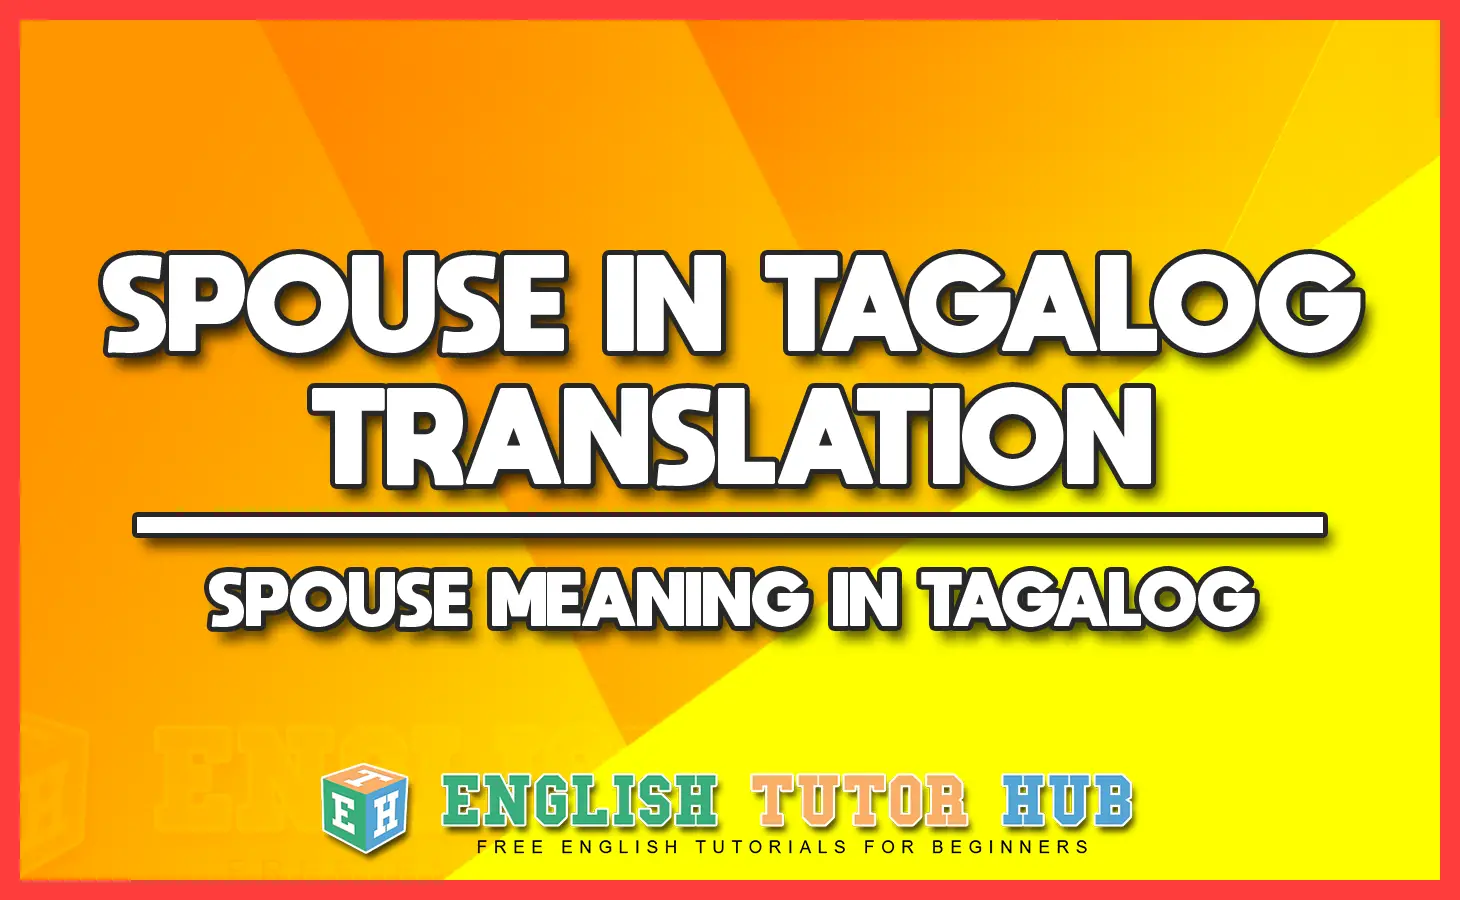 SPOUSE IN TAGALOG TRANSLATION SPOUSE MEANING IN TAGALOG 